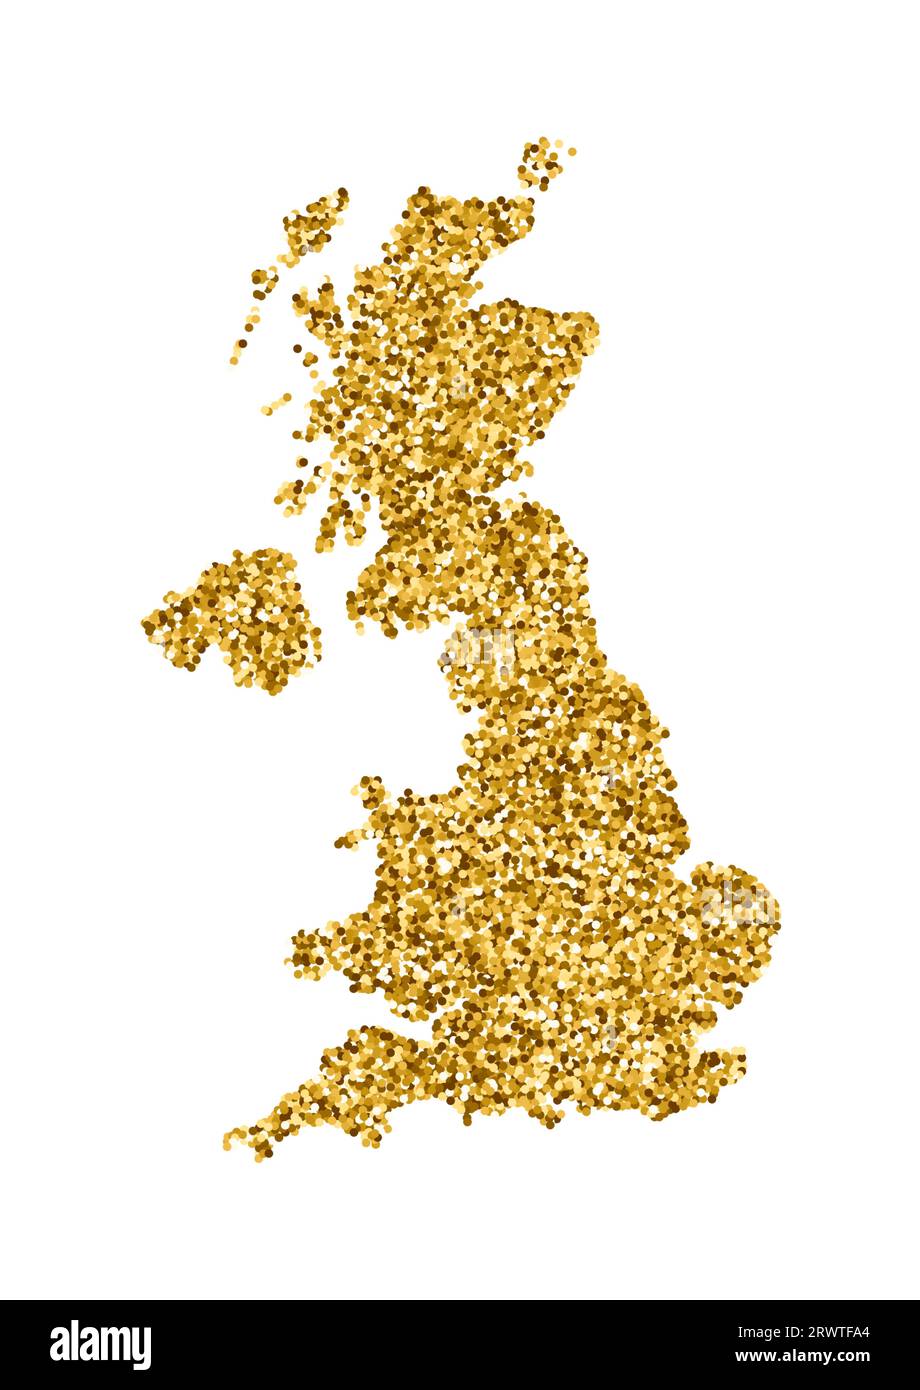 Vector isolated illustration with simplified The United Kingdom of Great Britain and Northern Ireland map. Decorated by shiny gold glitter texture. Ch Stock Vector